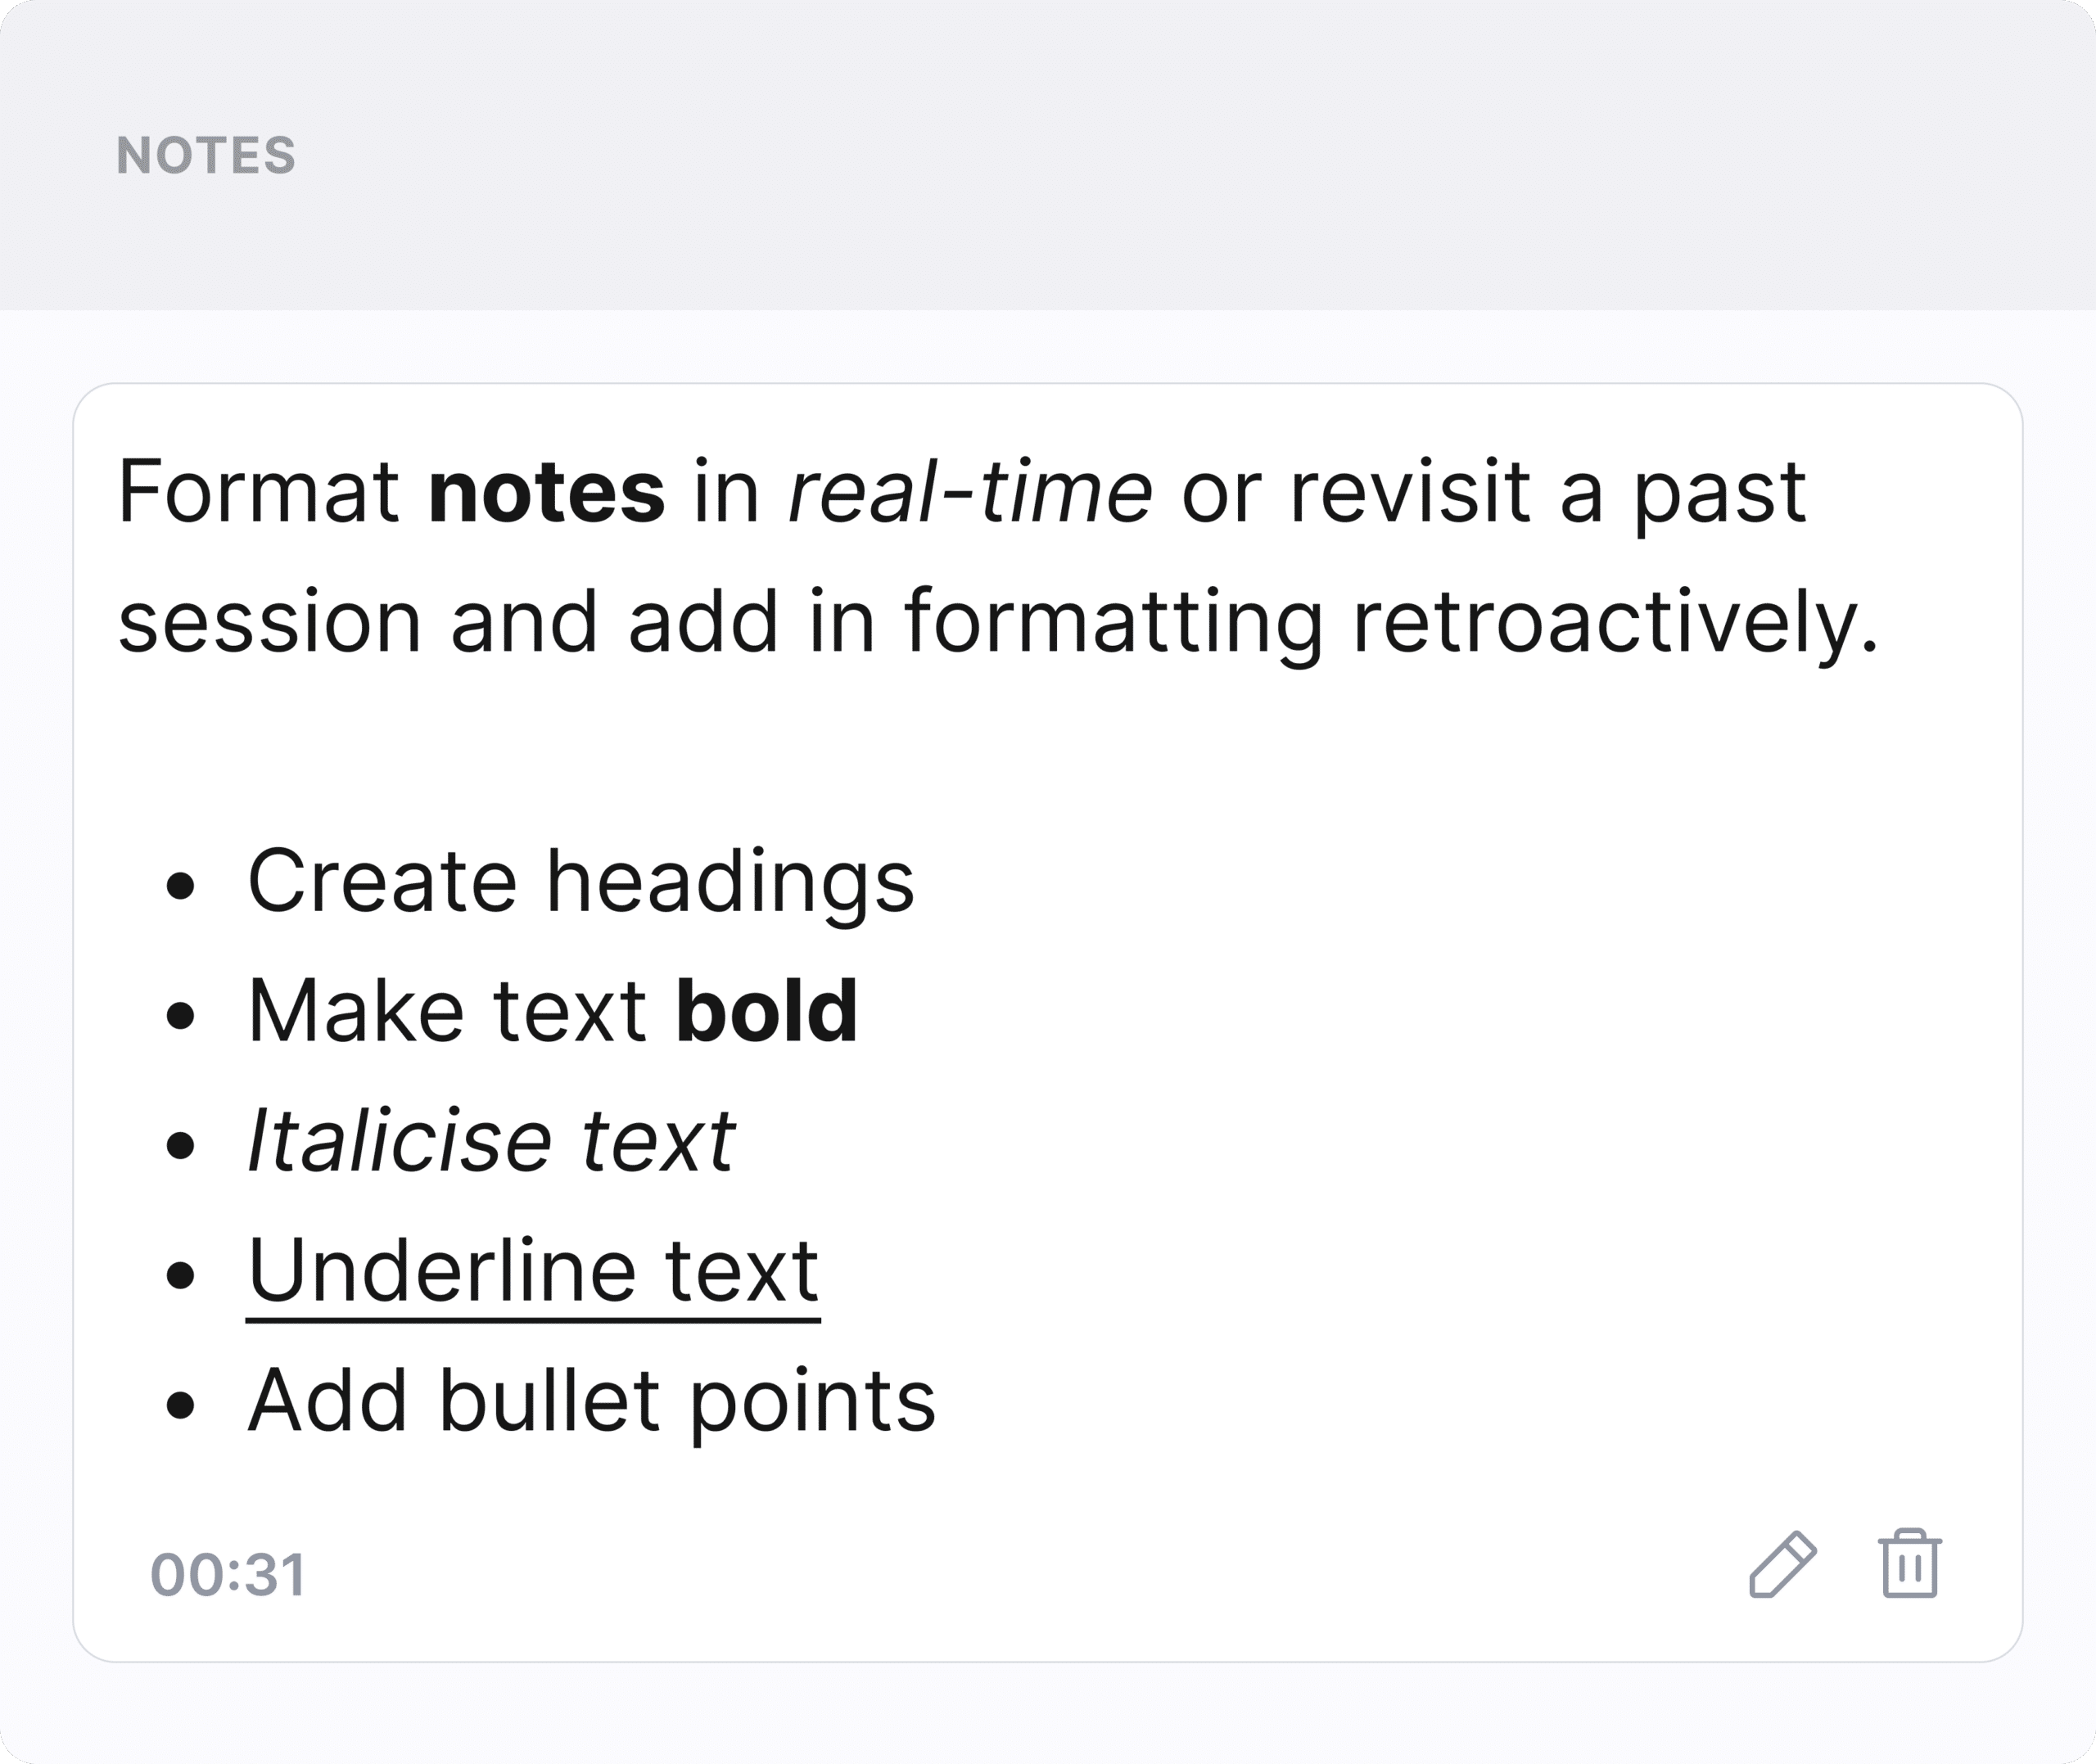 The Notes Editor, with the text: Format notes in real-time or revisit a past session and add in formatting retroactively. Create headings, make text bold, italicise text, underline text, add bullet points.